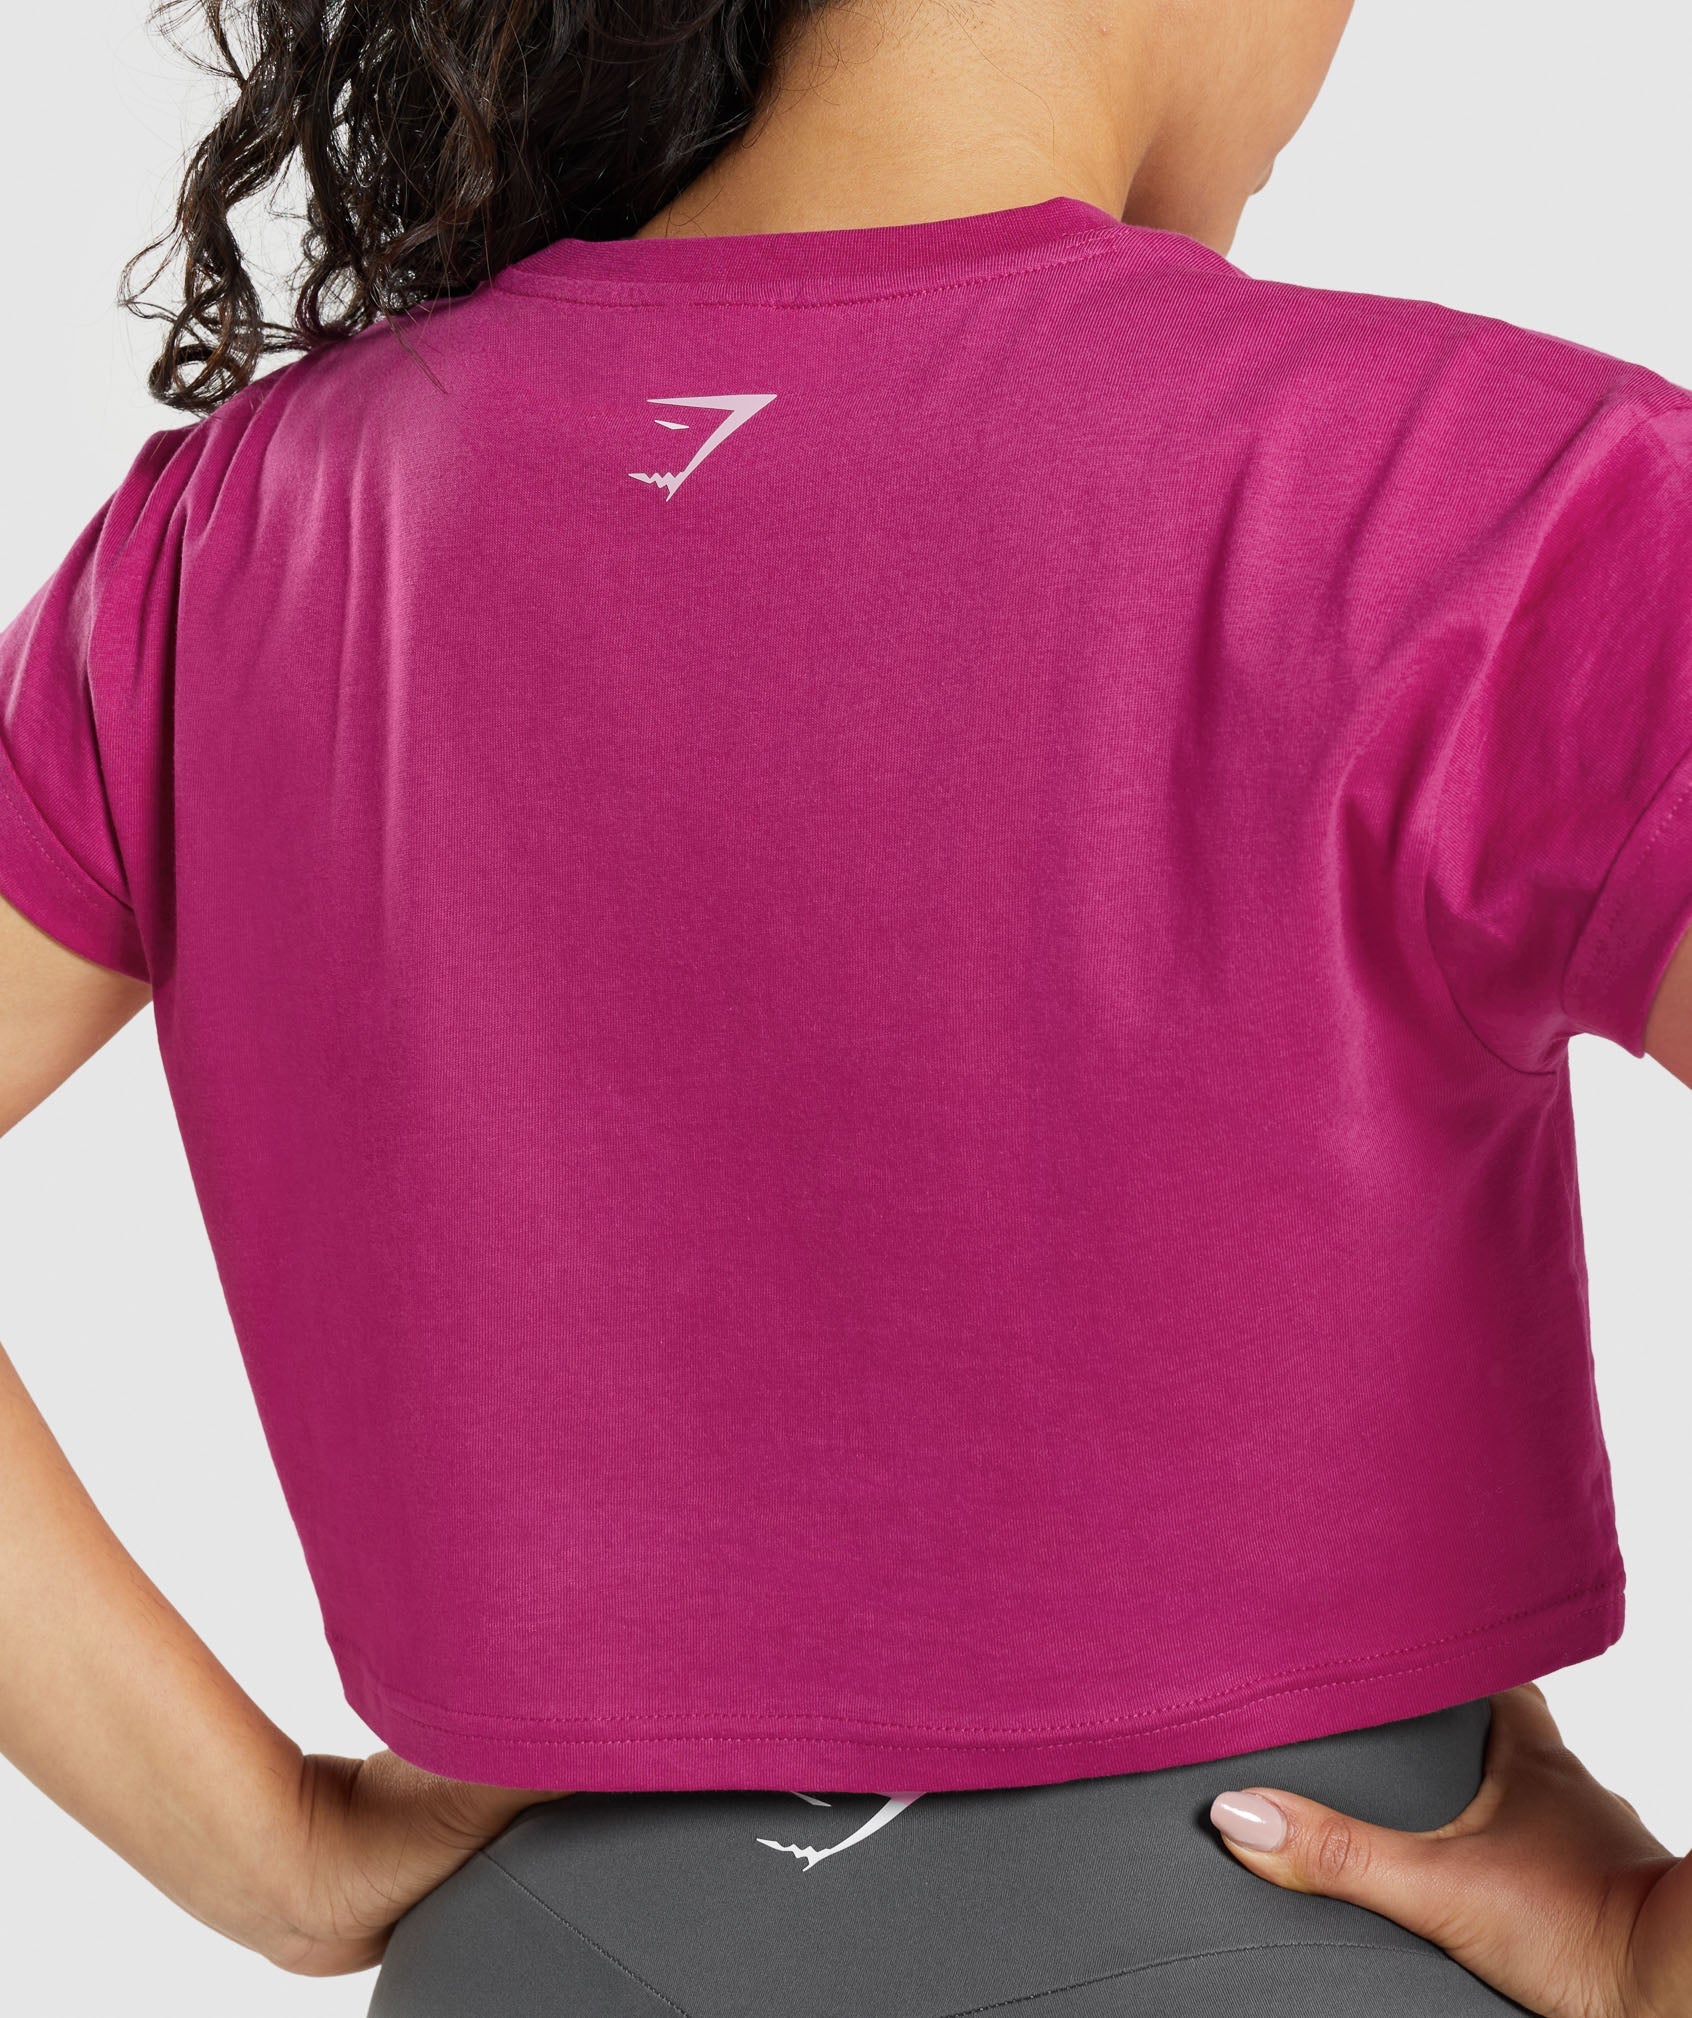 Fraction Crop Top in Dragon Pink - view 5